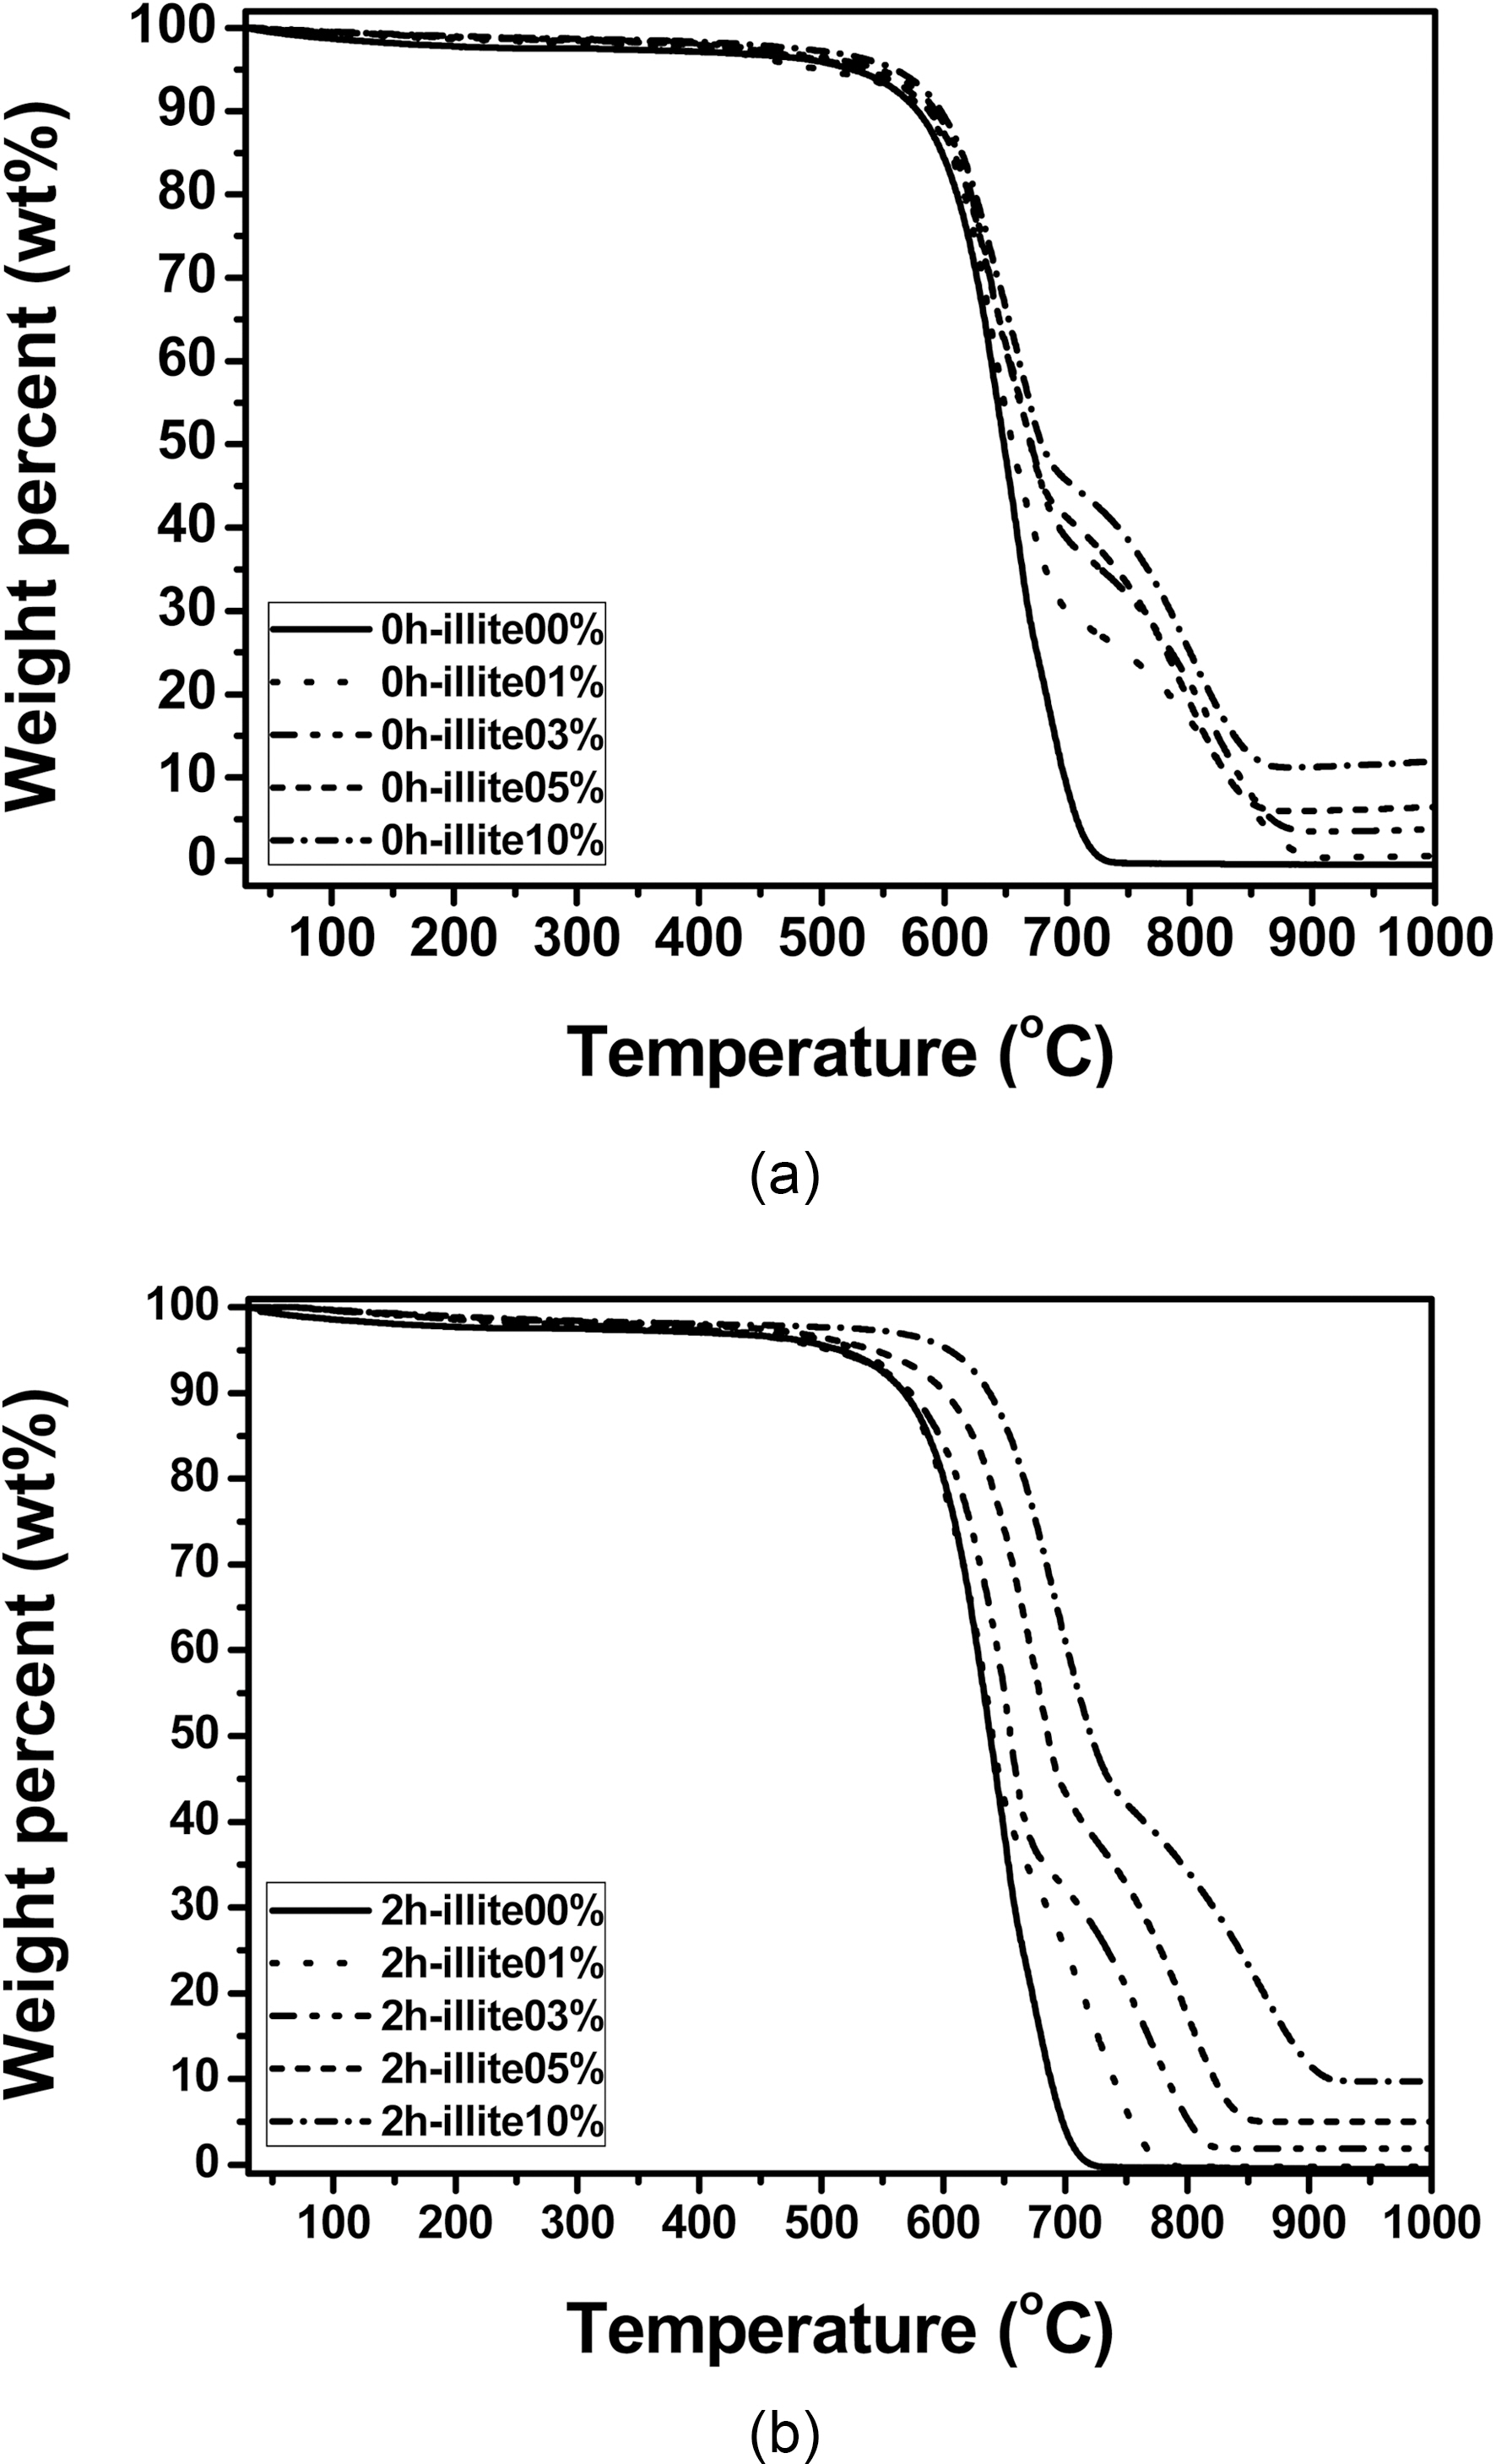 Anti-oxidation properties of the prepared C/C composites with (a) 0 h treated illite and (b) 2 h treated illite with various amounts of illite added.